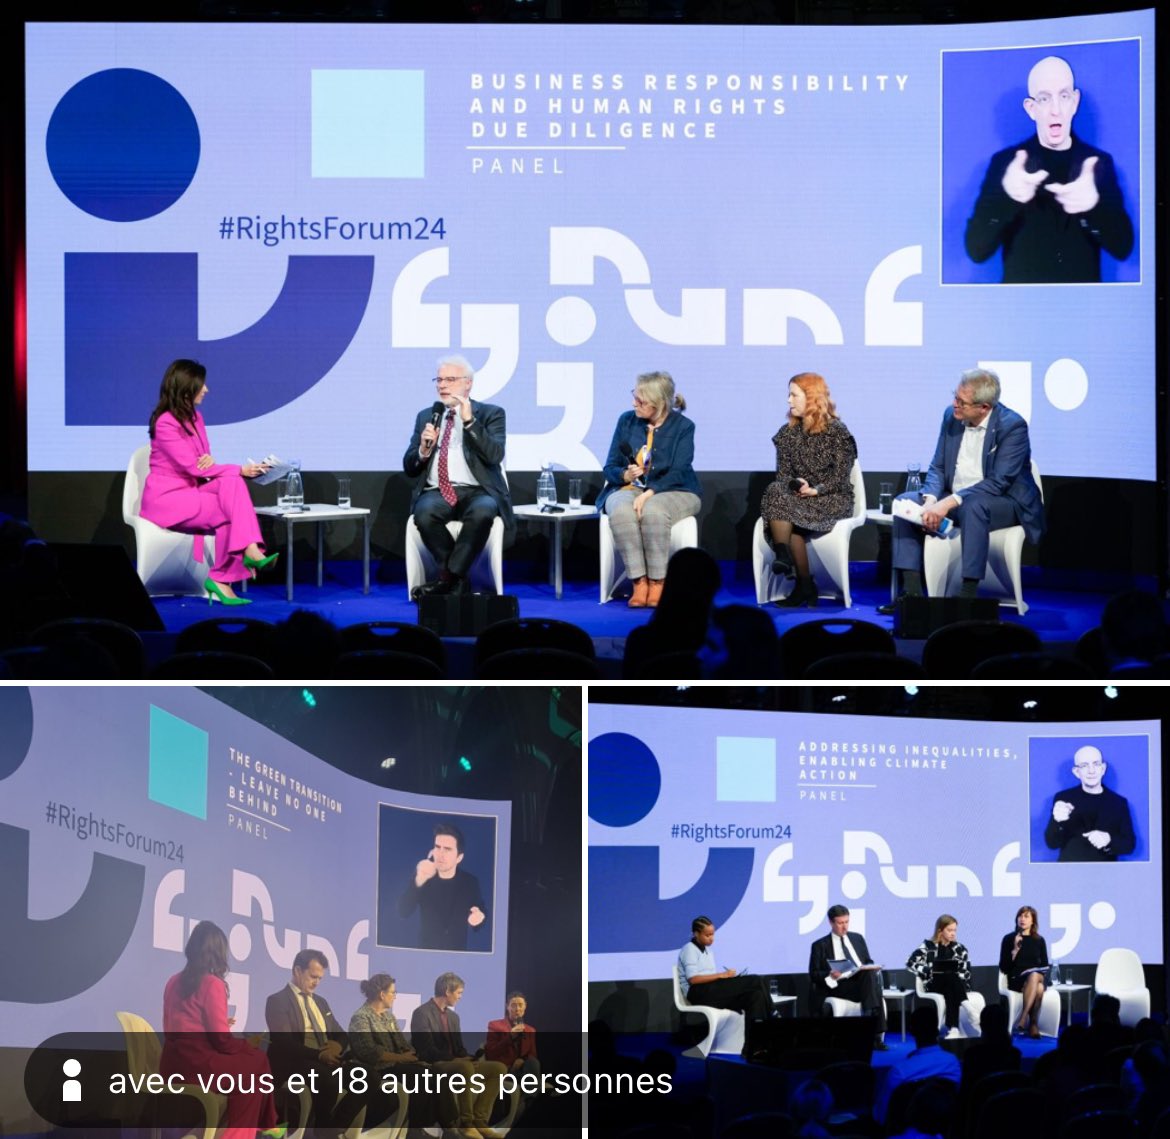 Congratulations @EURightsAgency and @FrisoRosAb for composing #inclusivepanels for this wonderful #RightsForum24.
A true mix of genders, origins and generations which brings more collective intelligence on stage